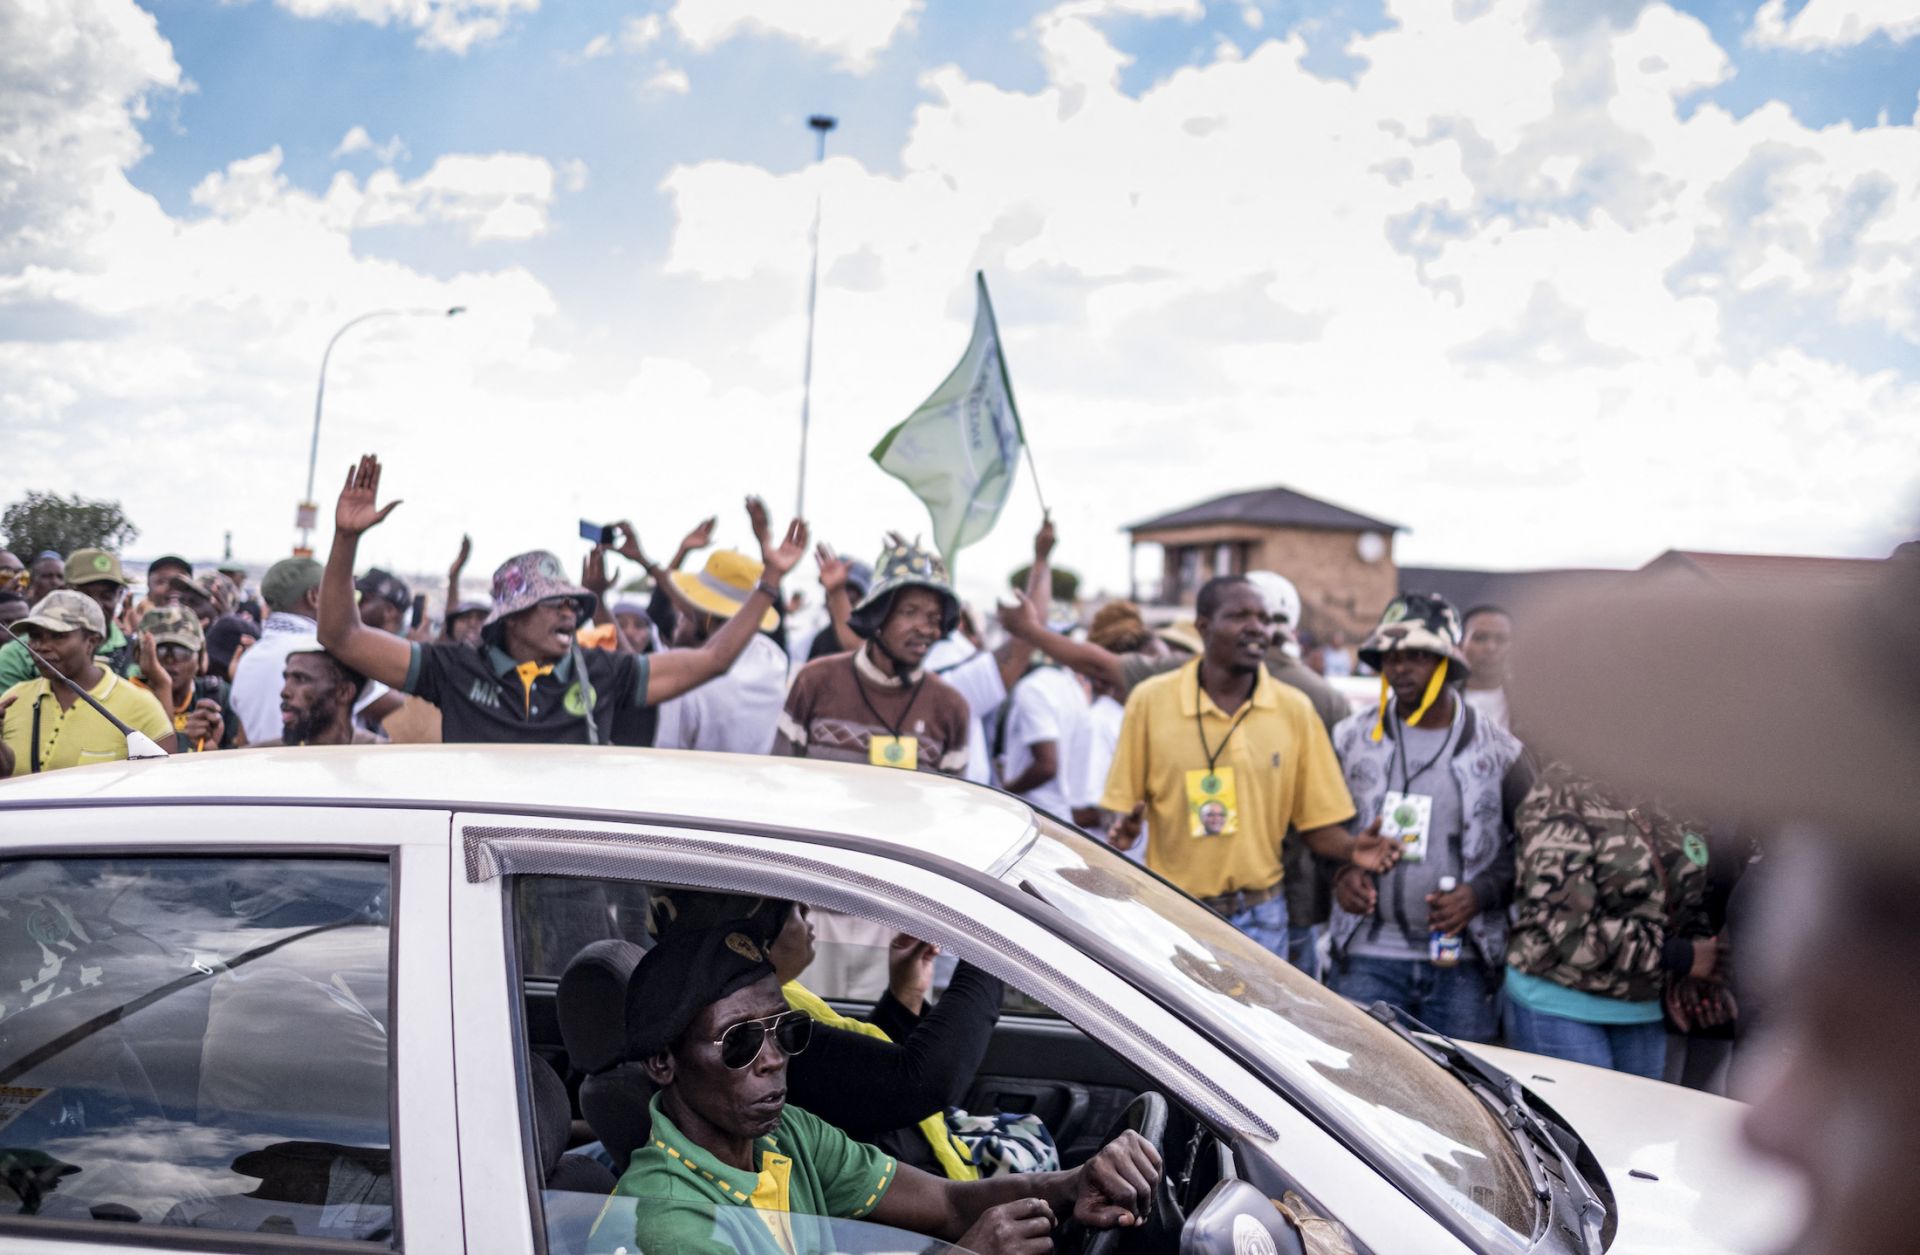 Supporters of former South African President Jacob Zuma sing and chant in Tembisa, South Africa, during a recruitment drive for Zuma's newly launched uMkhonto we Sizwe party on Jan. 21, 2024.